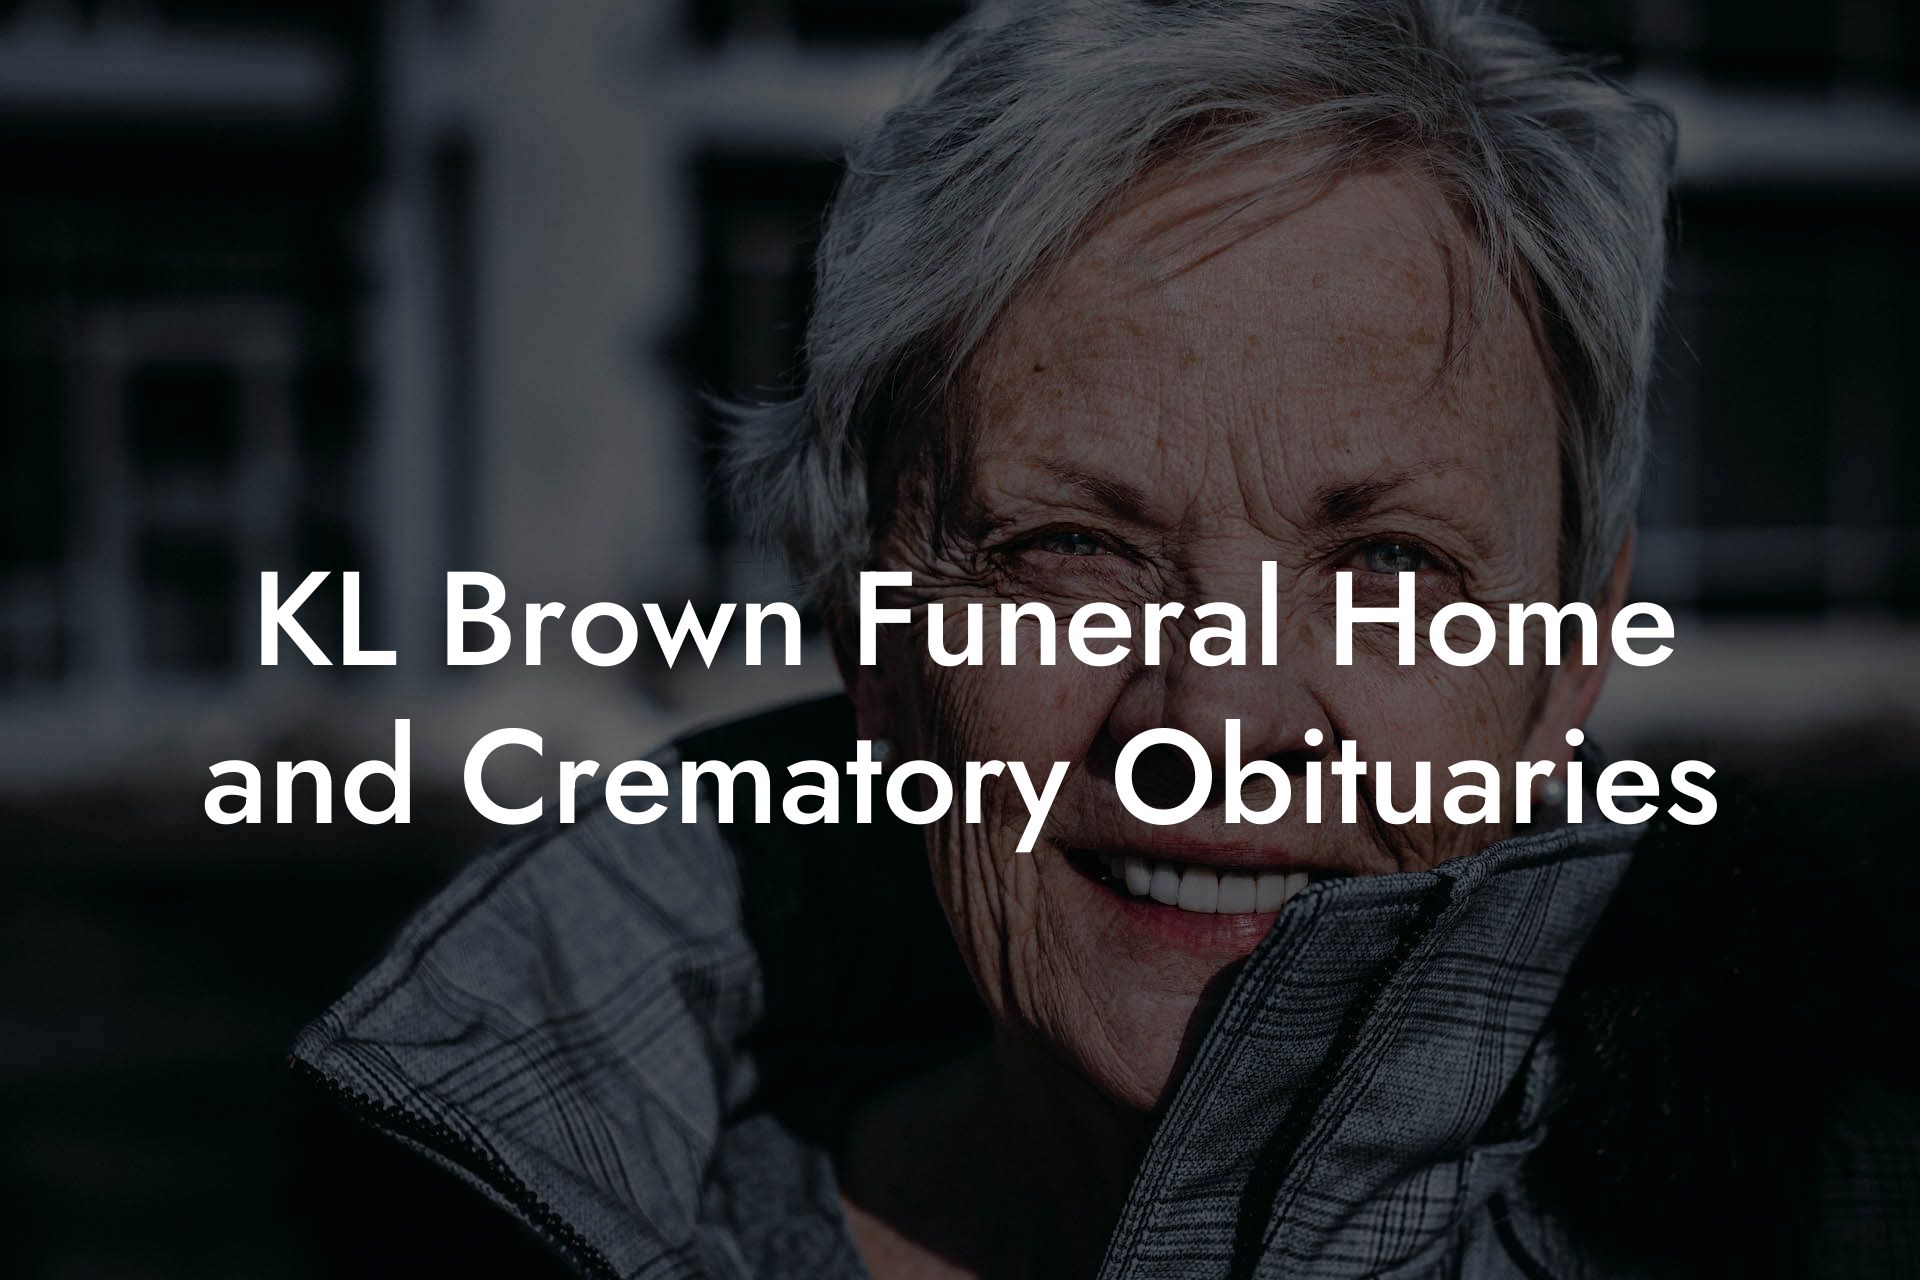 KL Brown Funeral Home and Crematory Obituaries